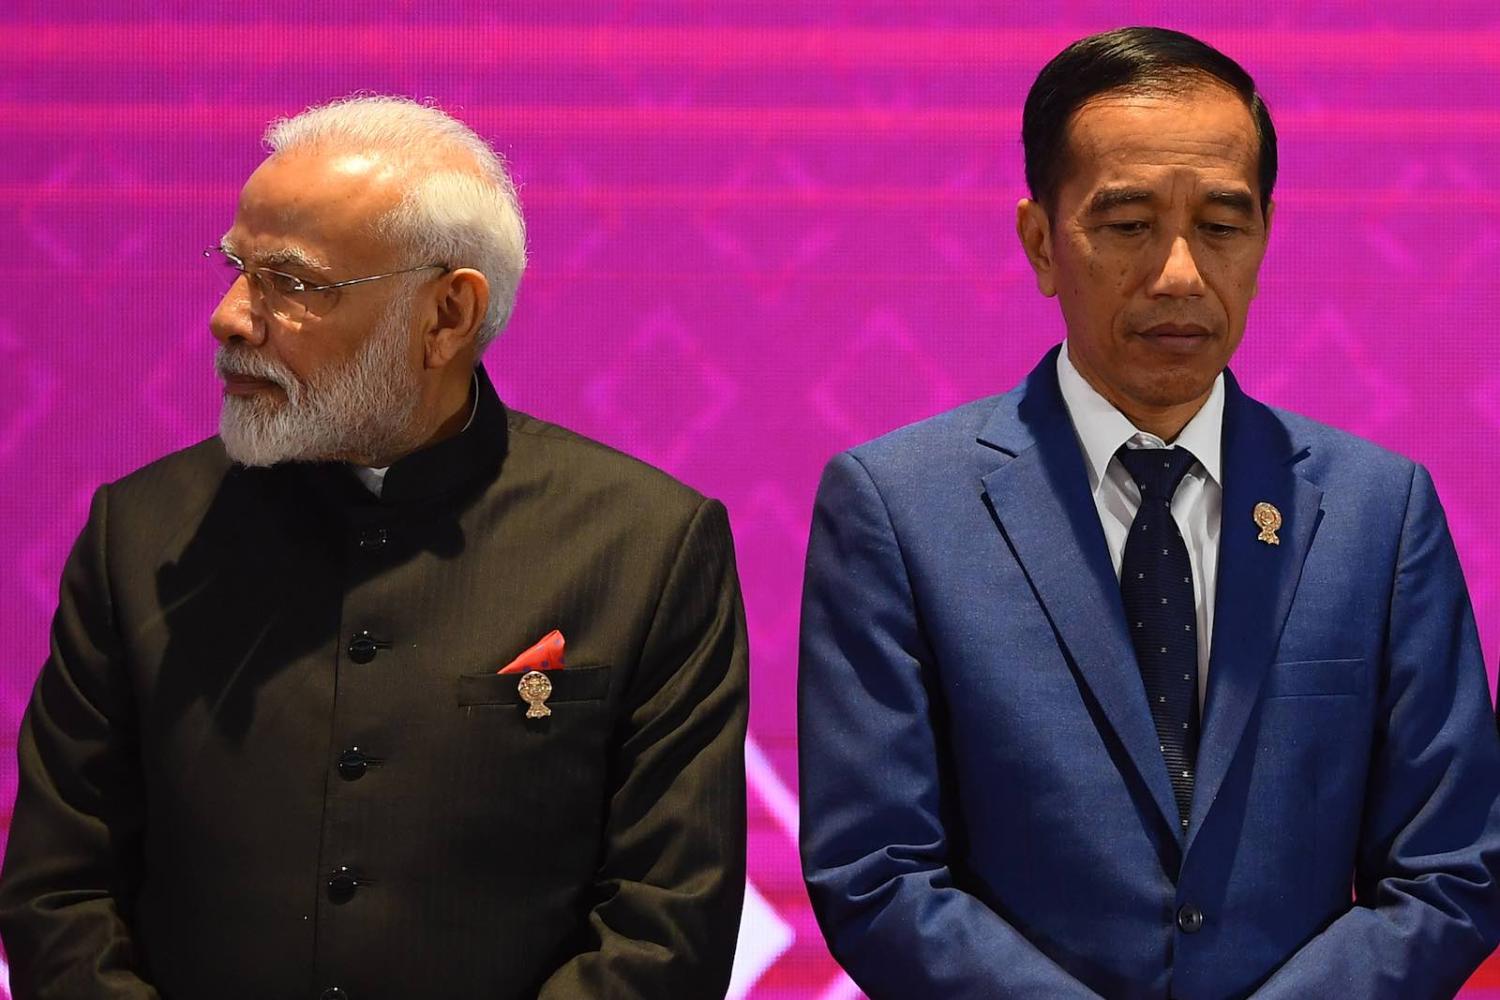 India's Prime Minister Narendra Modi and Indonesia's President Joko Widodo at the East Asia Summit in November (Photo: Manan Vatsyayna/AFP/Getty Images)